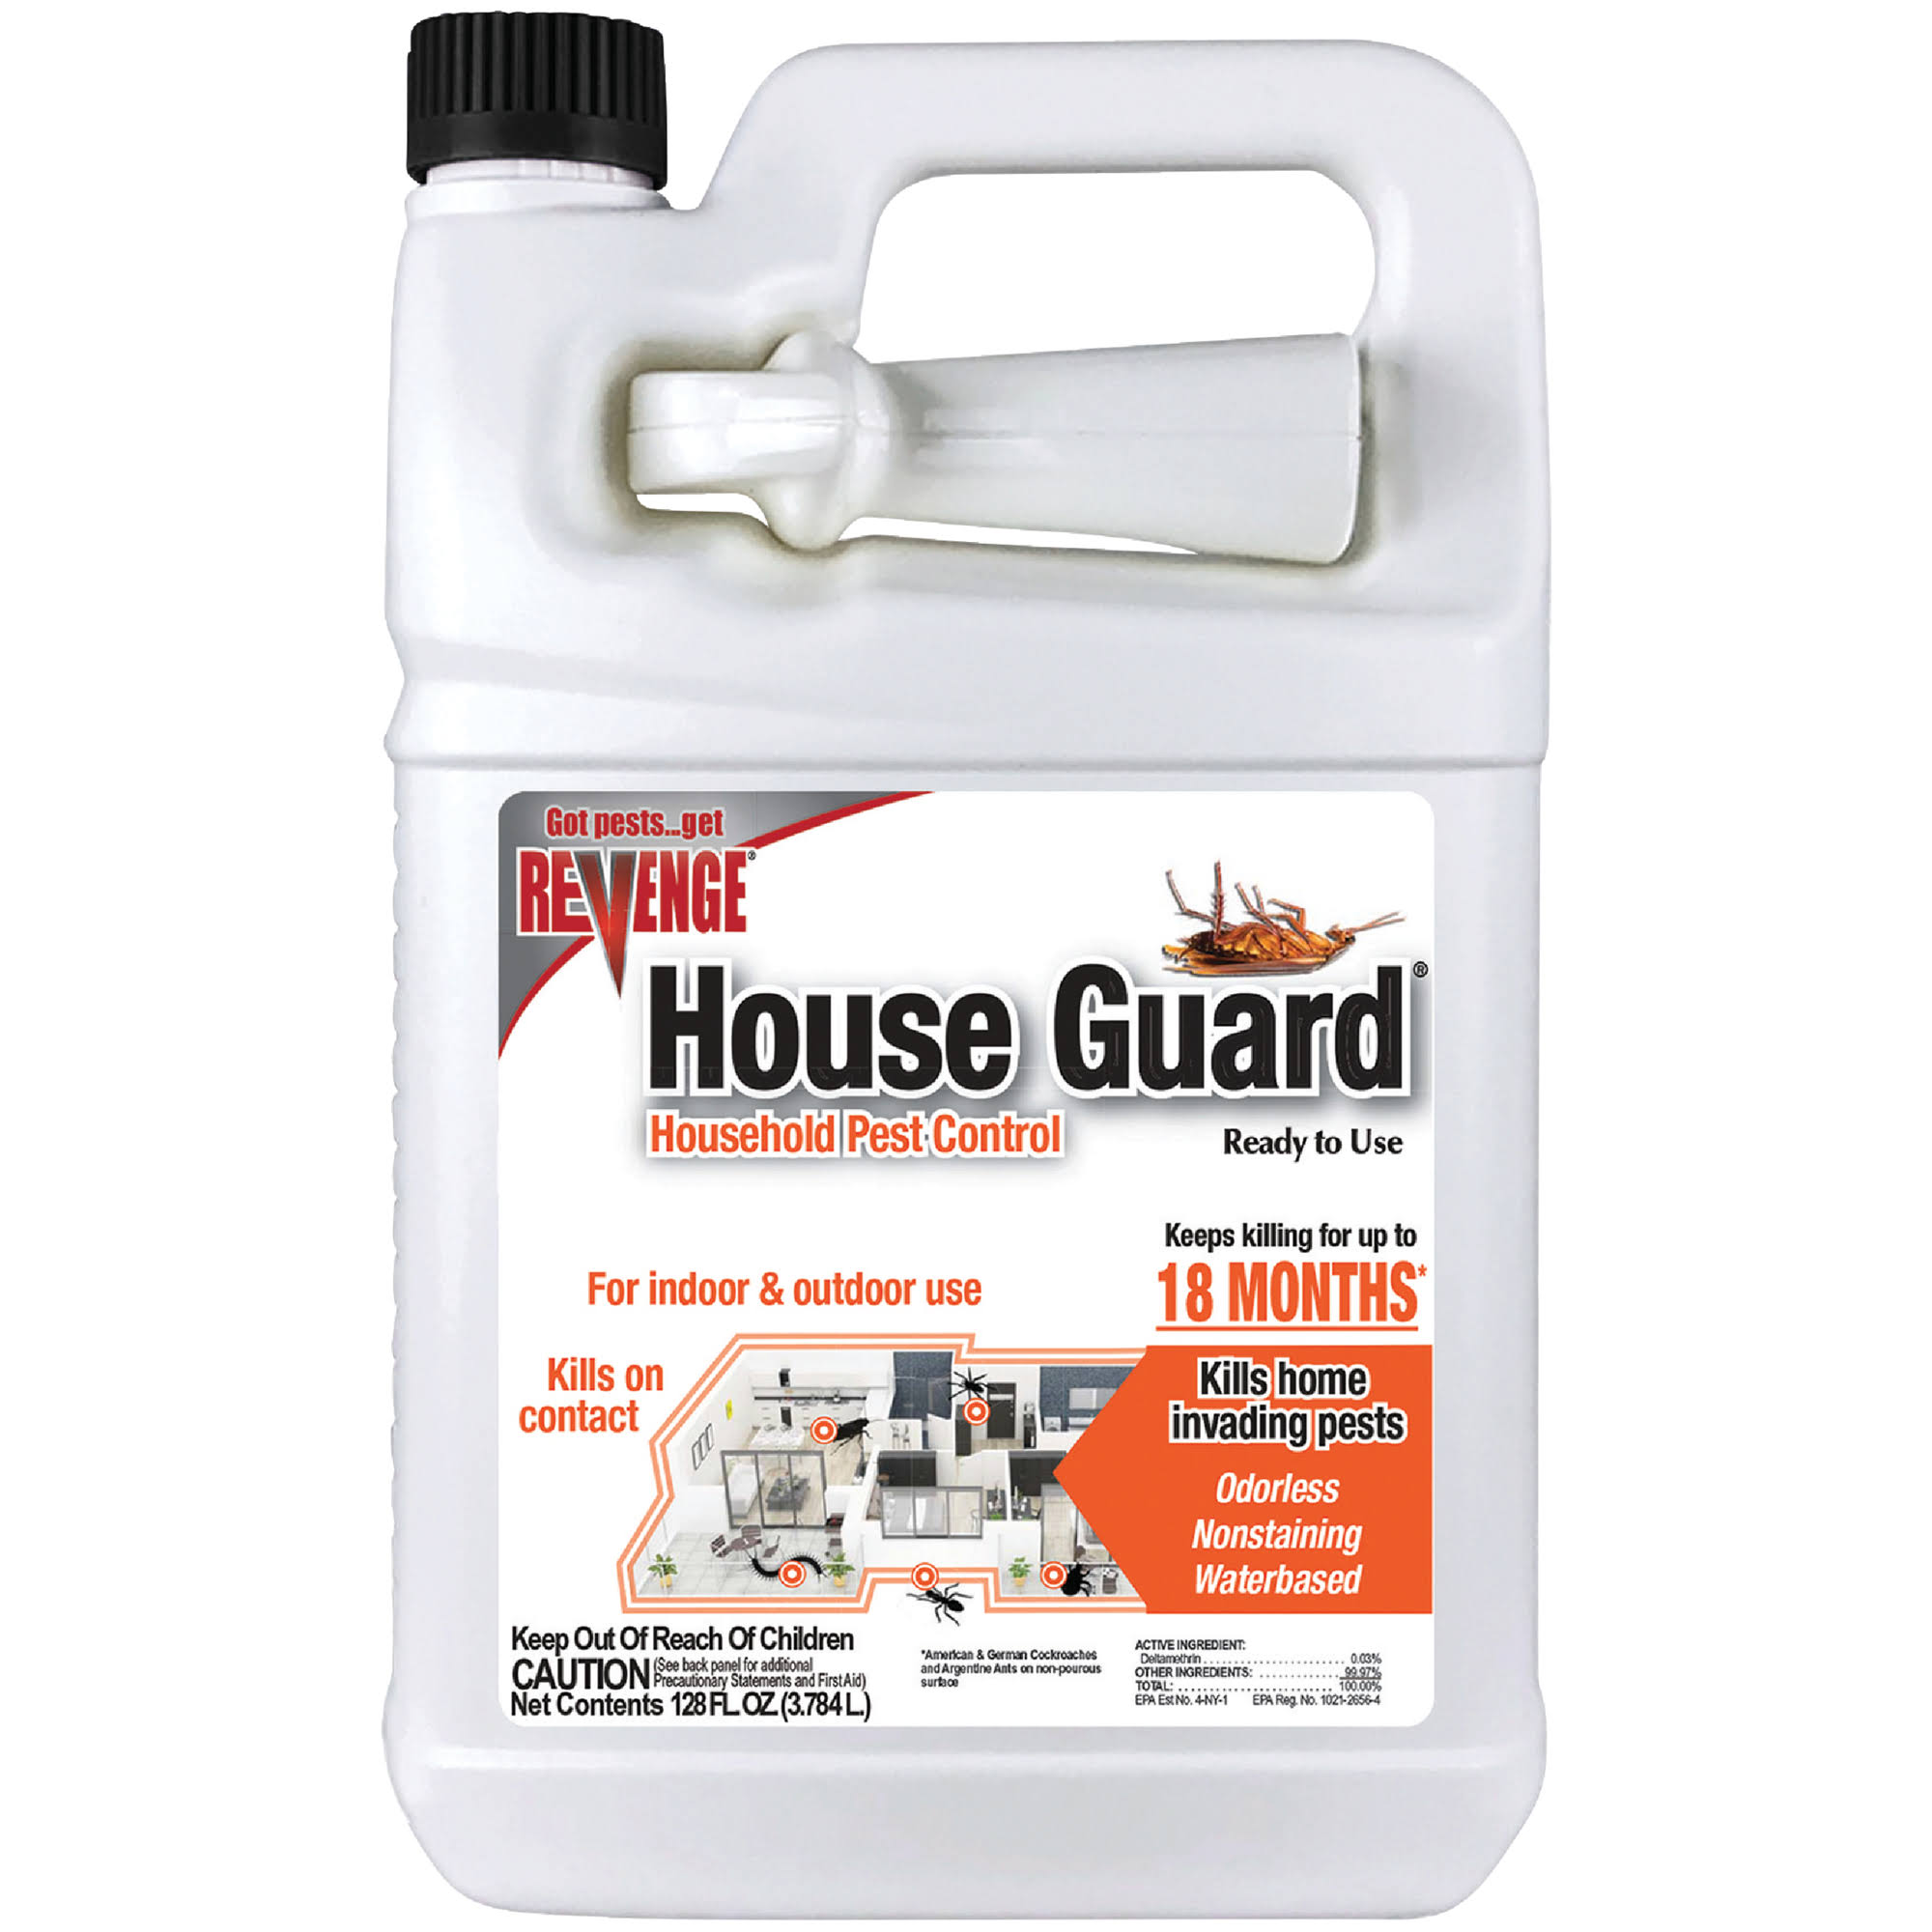 Revenge House Guard 46540 Insect Control Ready-to-Use, 1 Gal 4 Pack